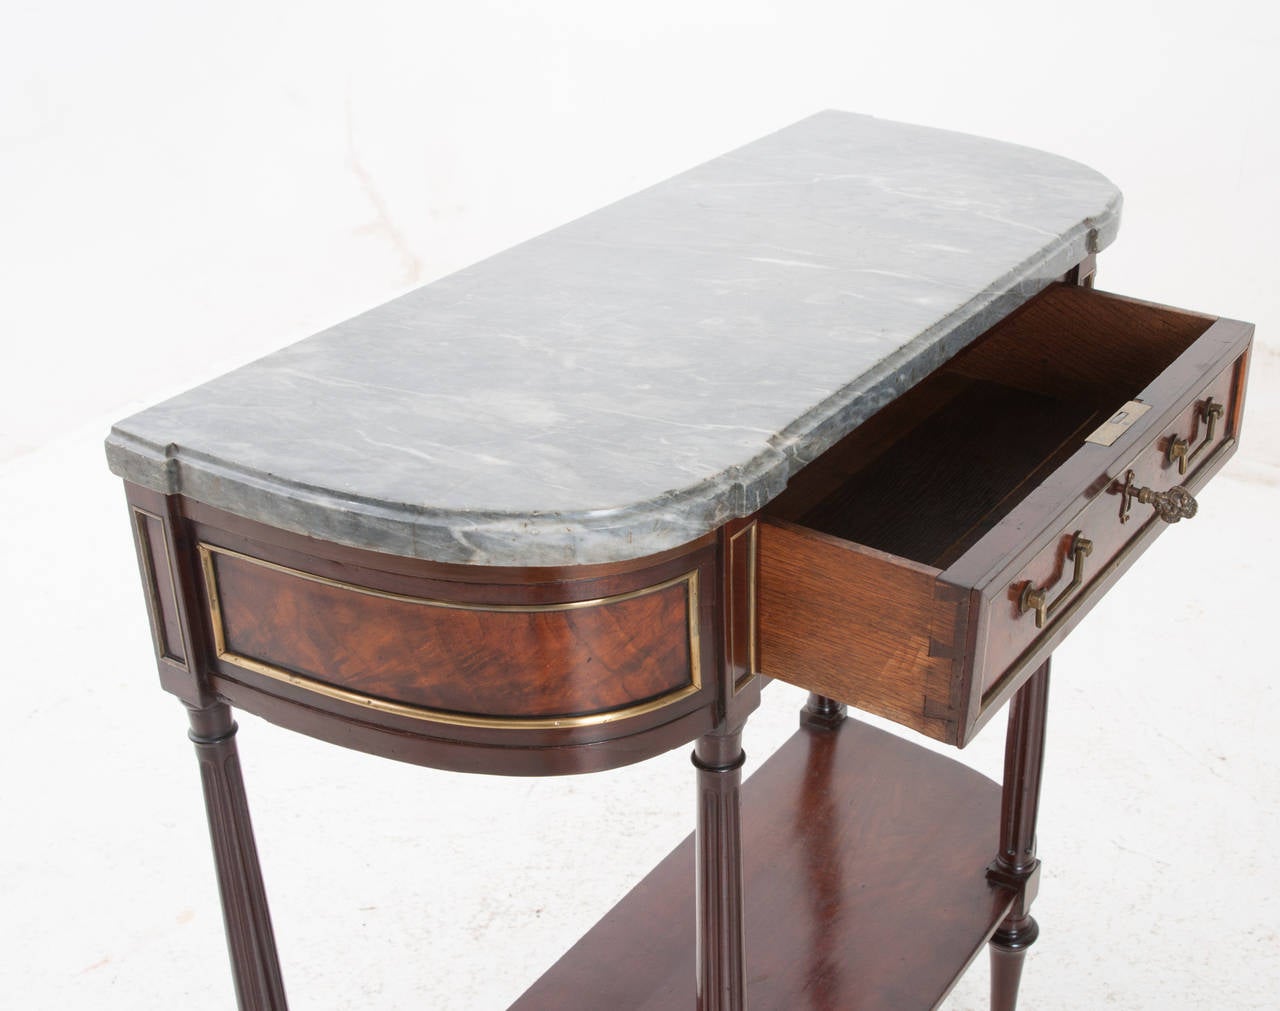 A petite console table in the Louis XVI taste with its original shaped gray marble top. The mahogany base is darling with burl mahogany veneer paneling around the apron, accented with brass banding. A single drawer is found in cleaned working